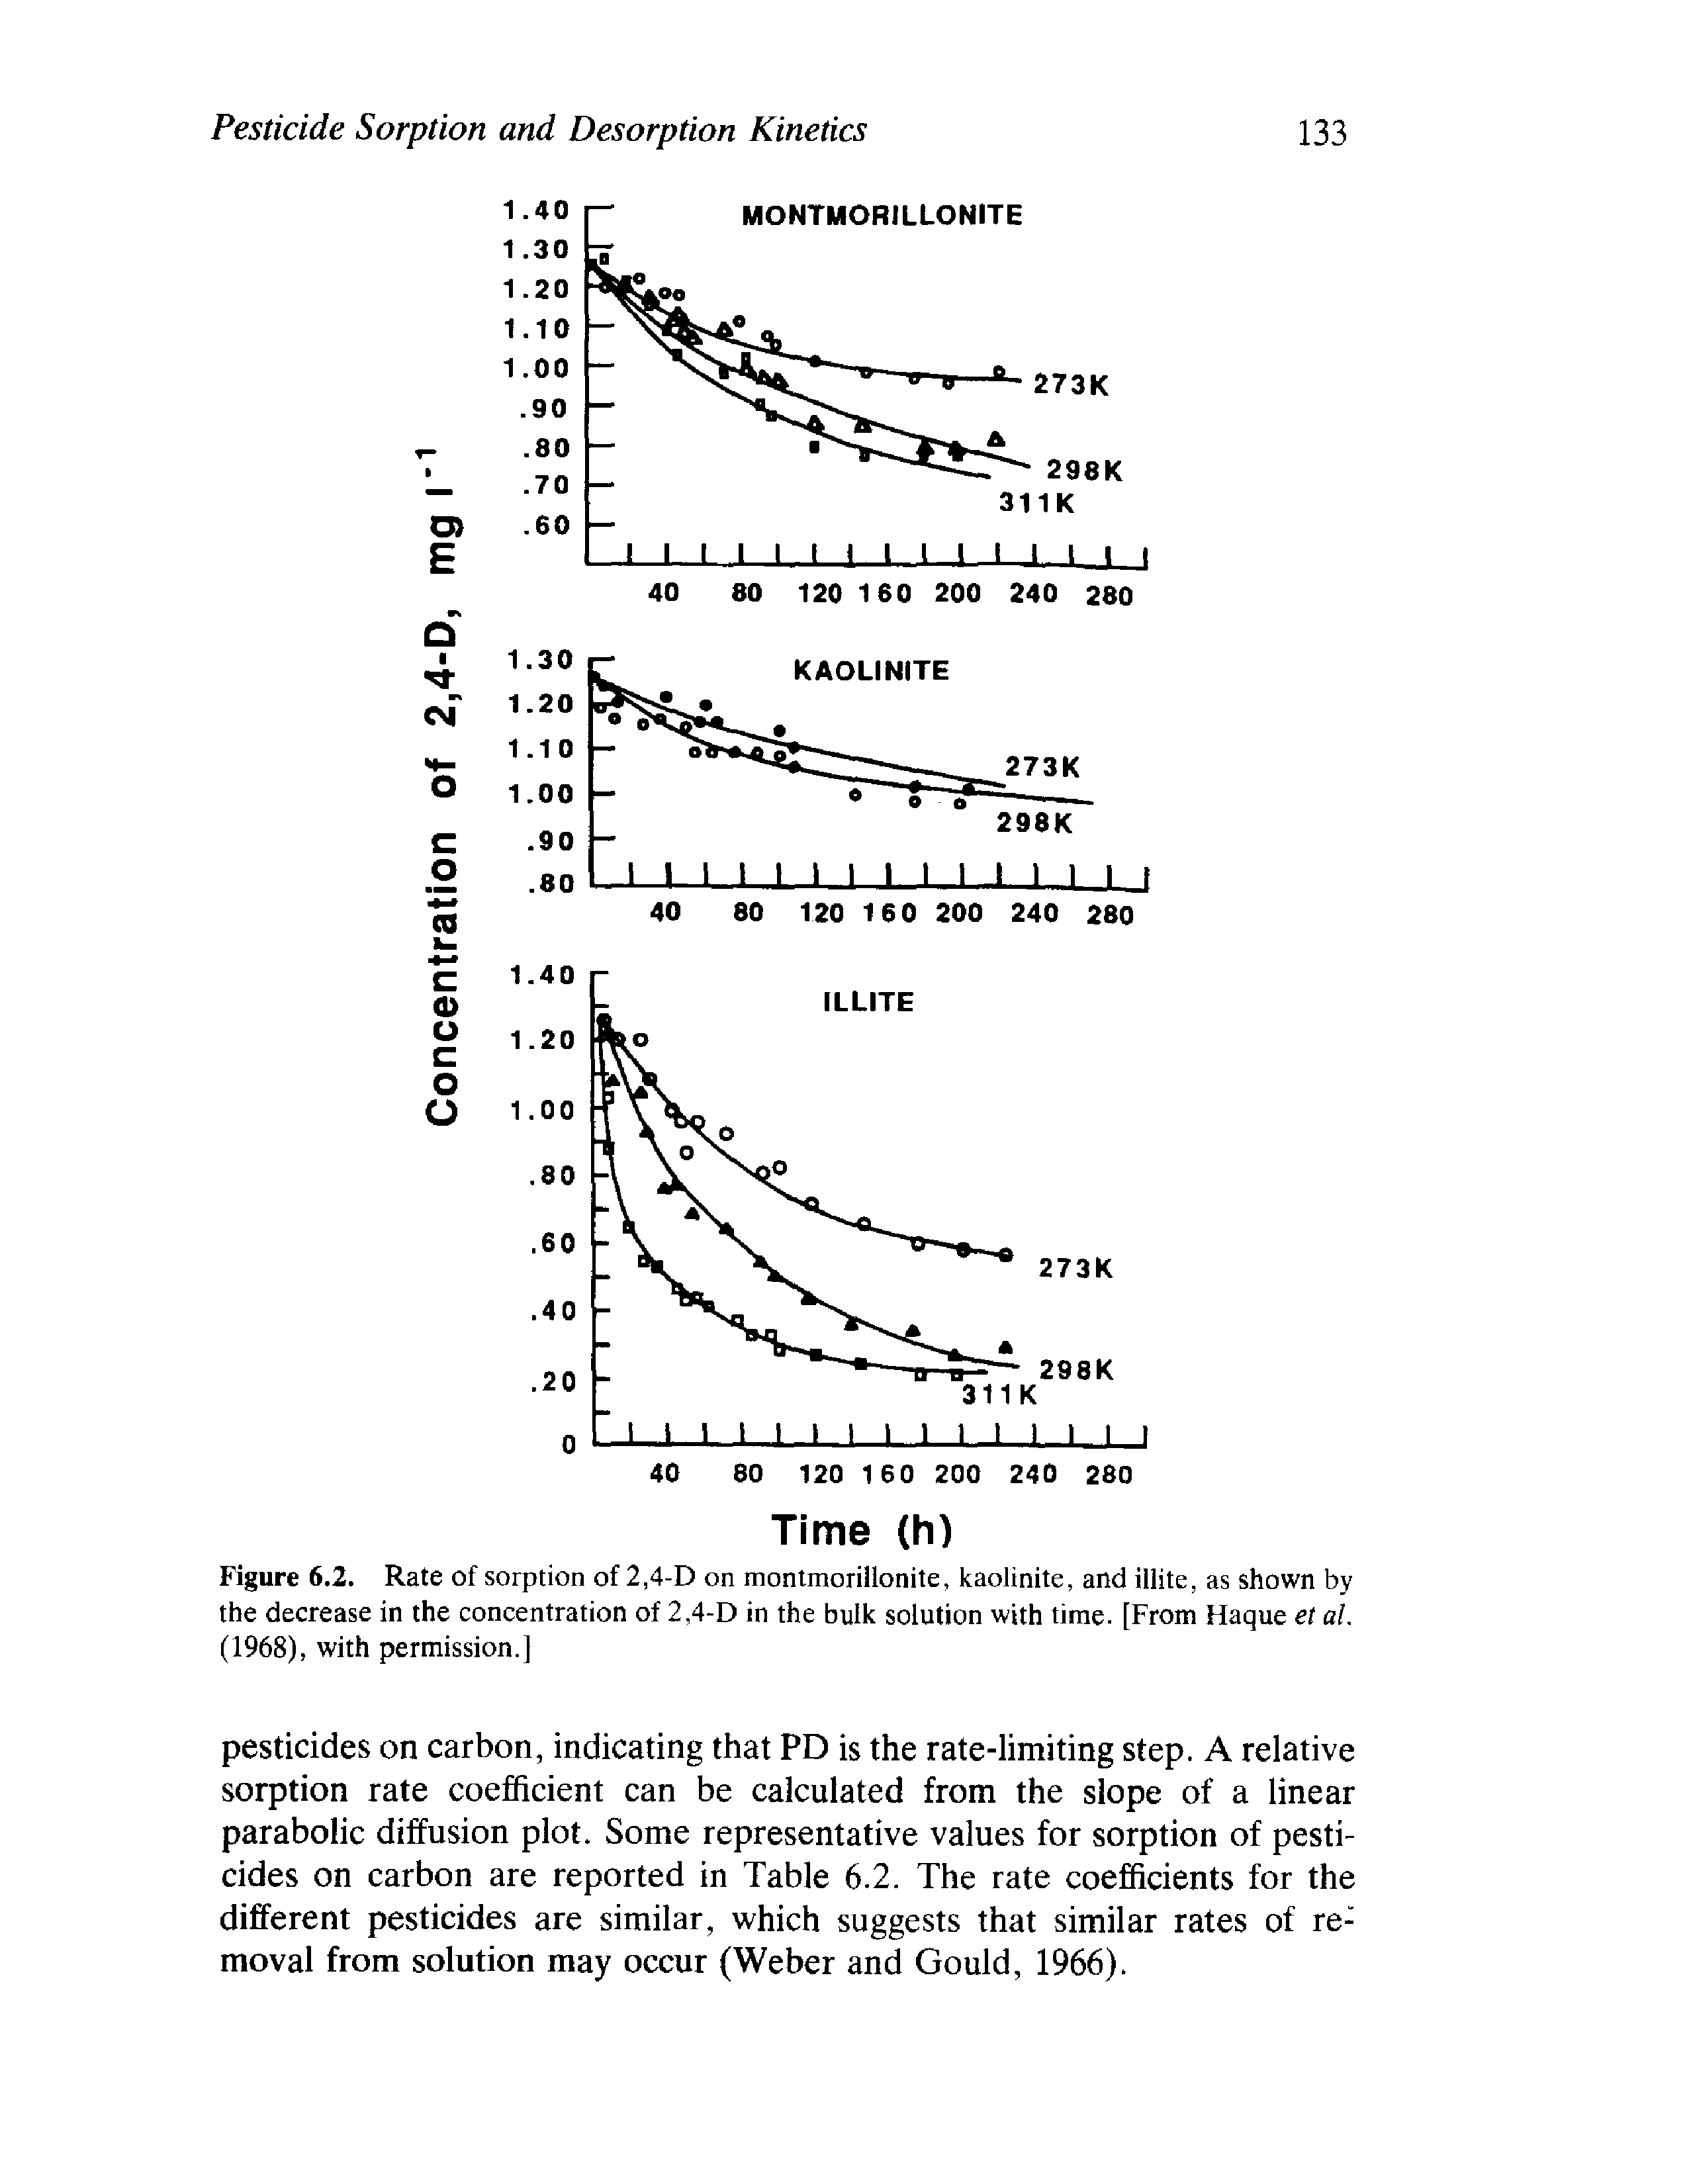 Figure 6.2. Rate of sorption of 2,4-D on montmorillonite, kaolinite, and iilite, as shown by the decrease in the concentration of 2,4-D in the bulk solution with time. [From Haque et al. (1968), with permission.]...